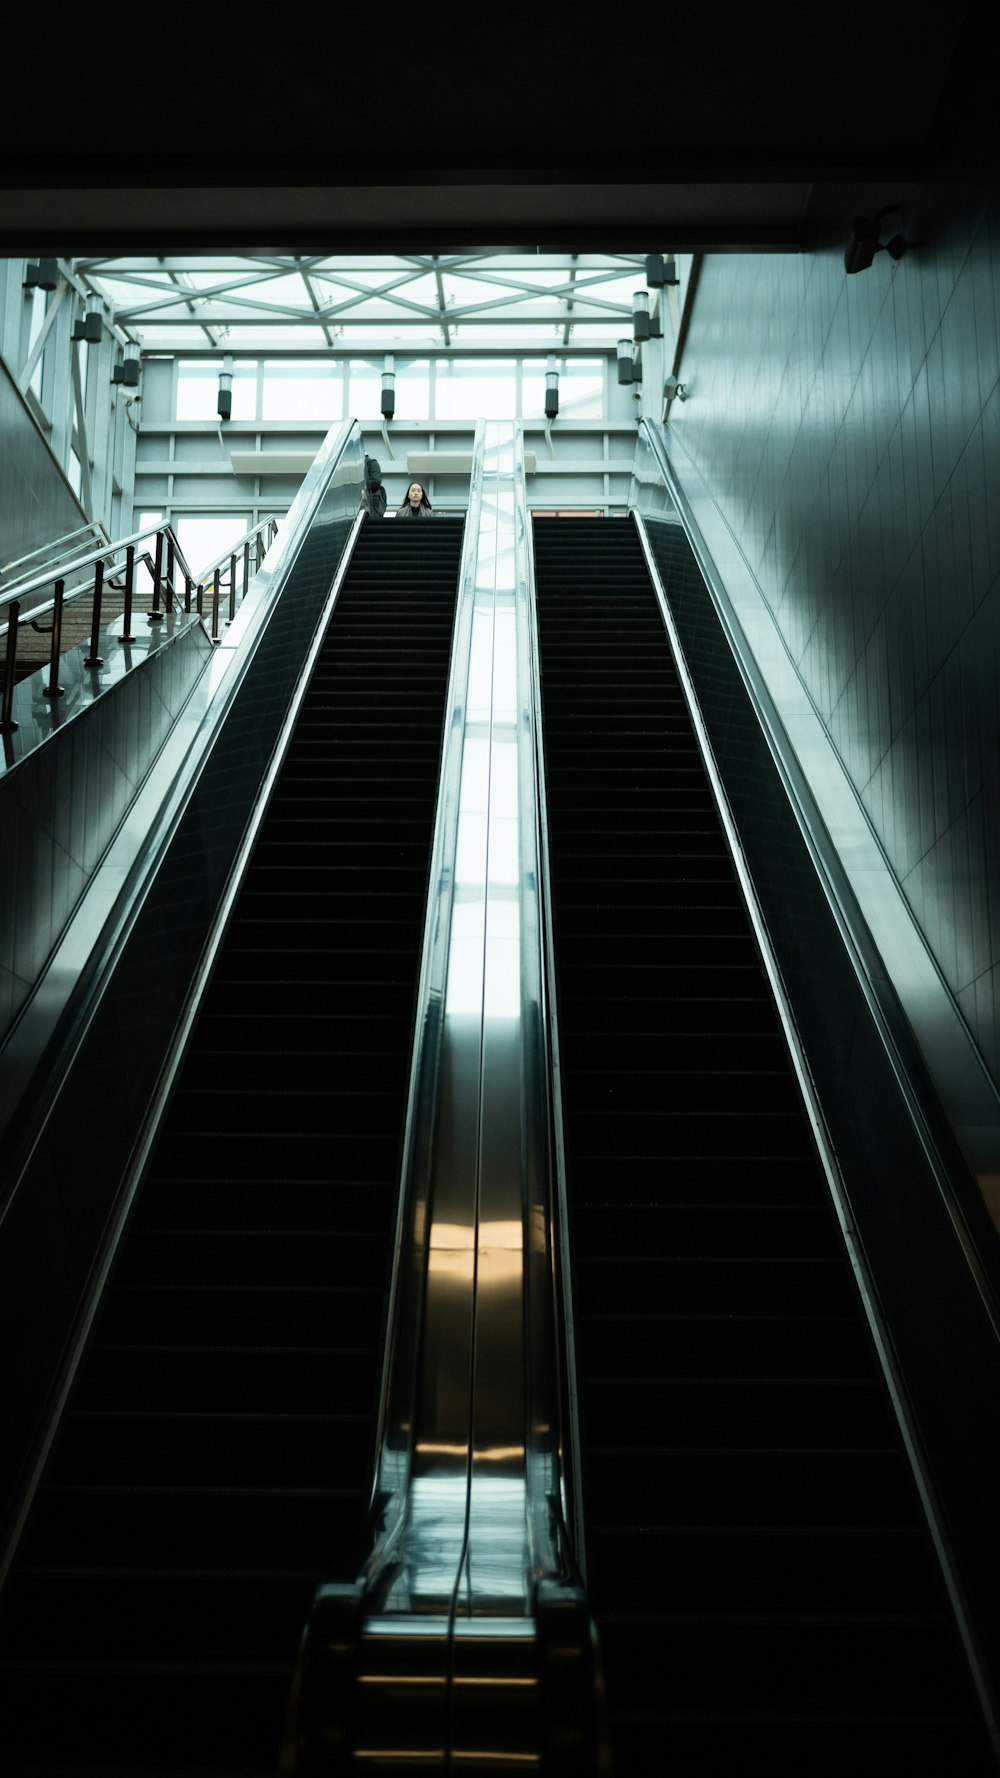 an escalator in a building with people on it